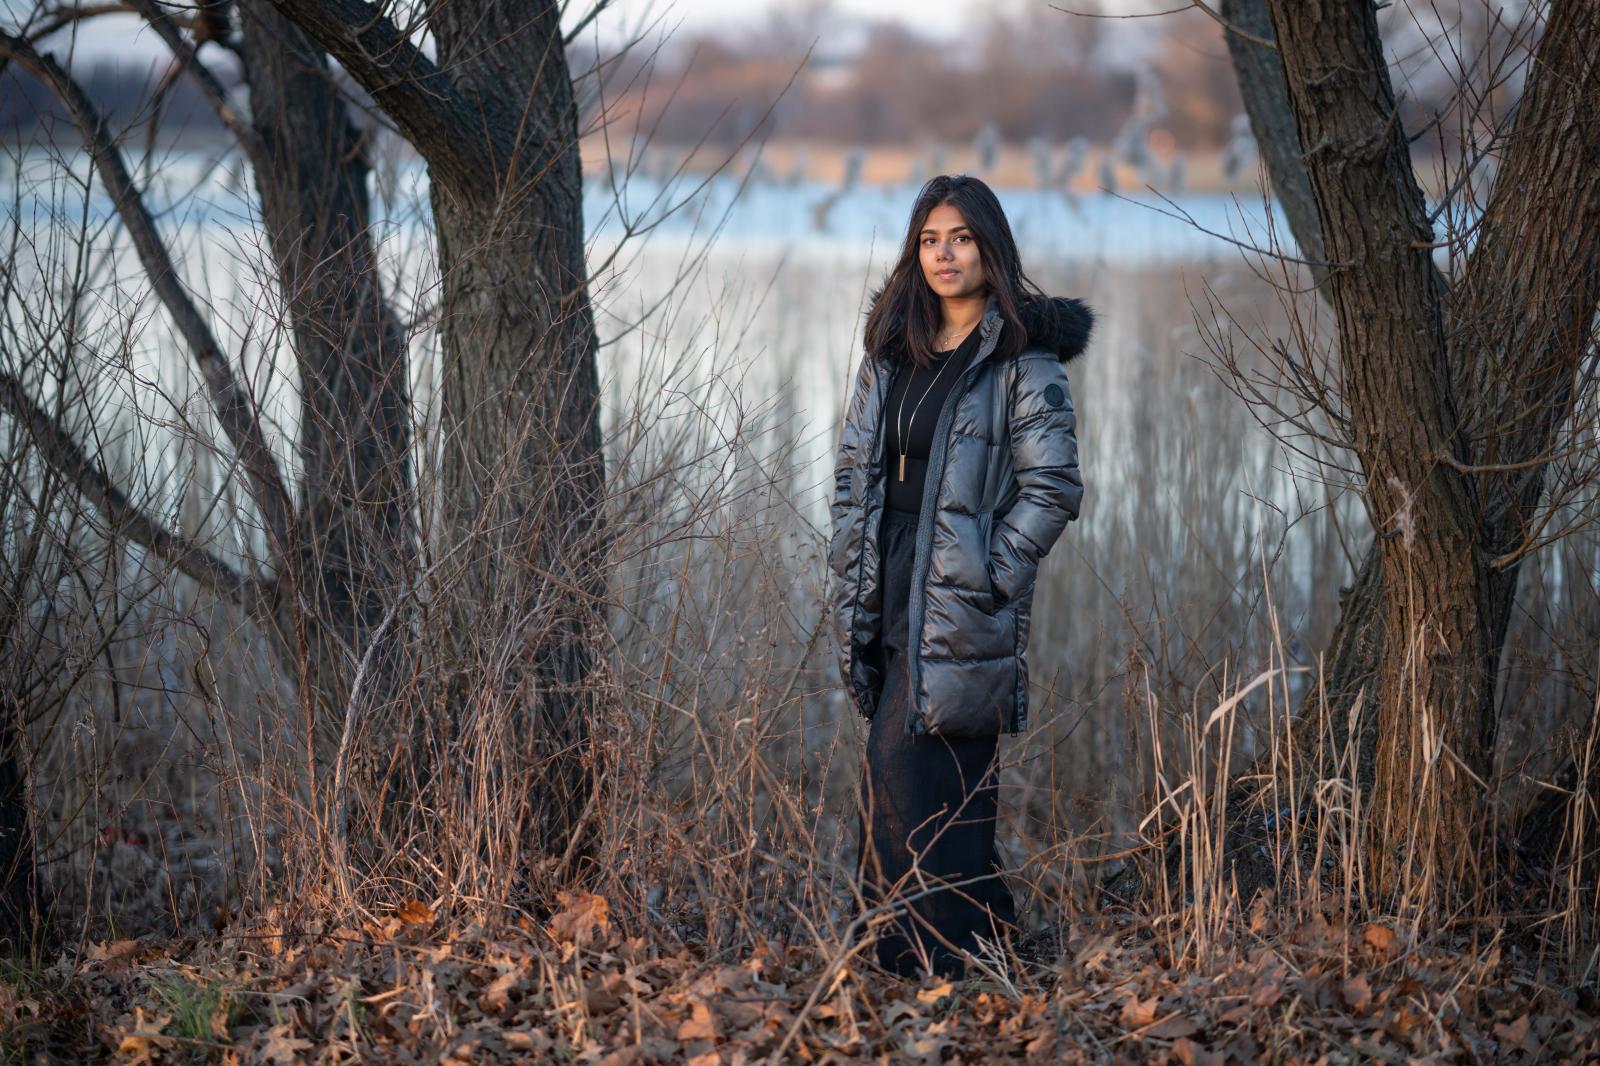 Image from Portraits - Aryaana Khan poses for a portrait in Baisley Pond Park in...